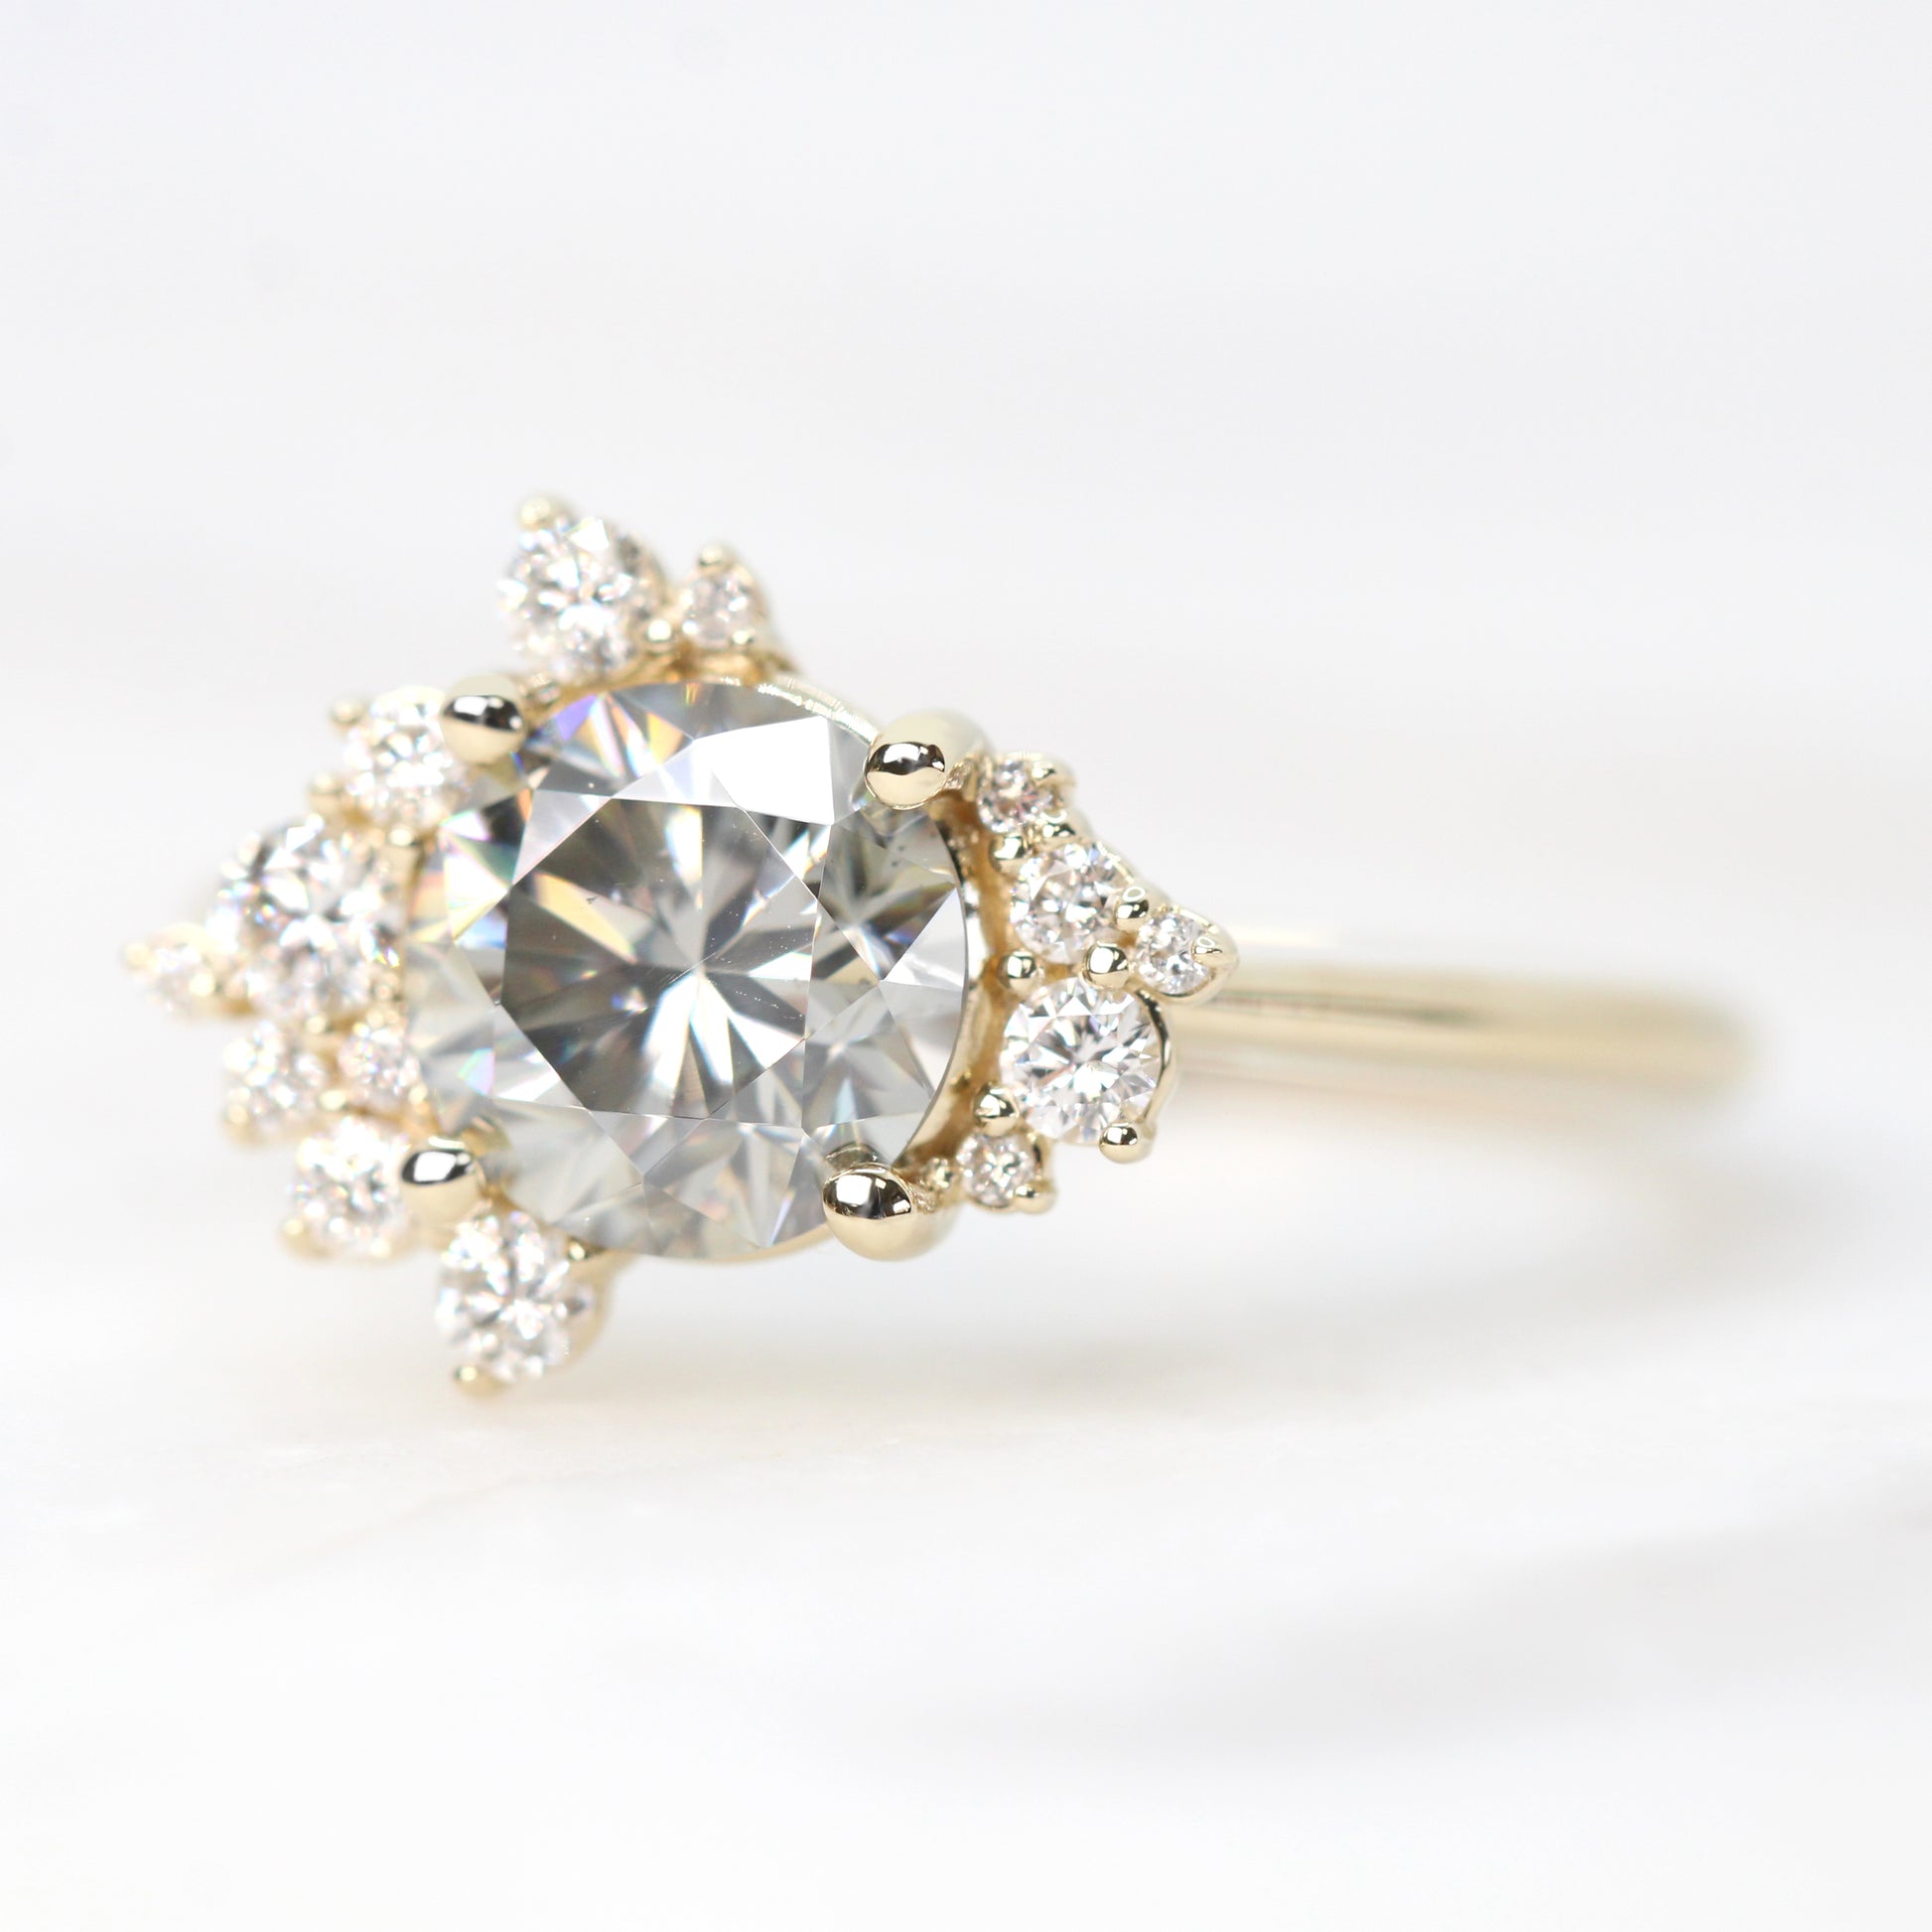 Orion Ring with a Round Gray Moissanite and White Accent Diamonds - Made to Order, Choose your Gold Tone - Midwinter Co. Alternative Bridal Rings and Modern Fine Jewelry